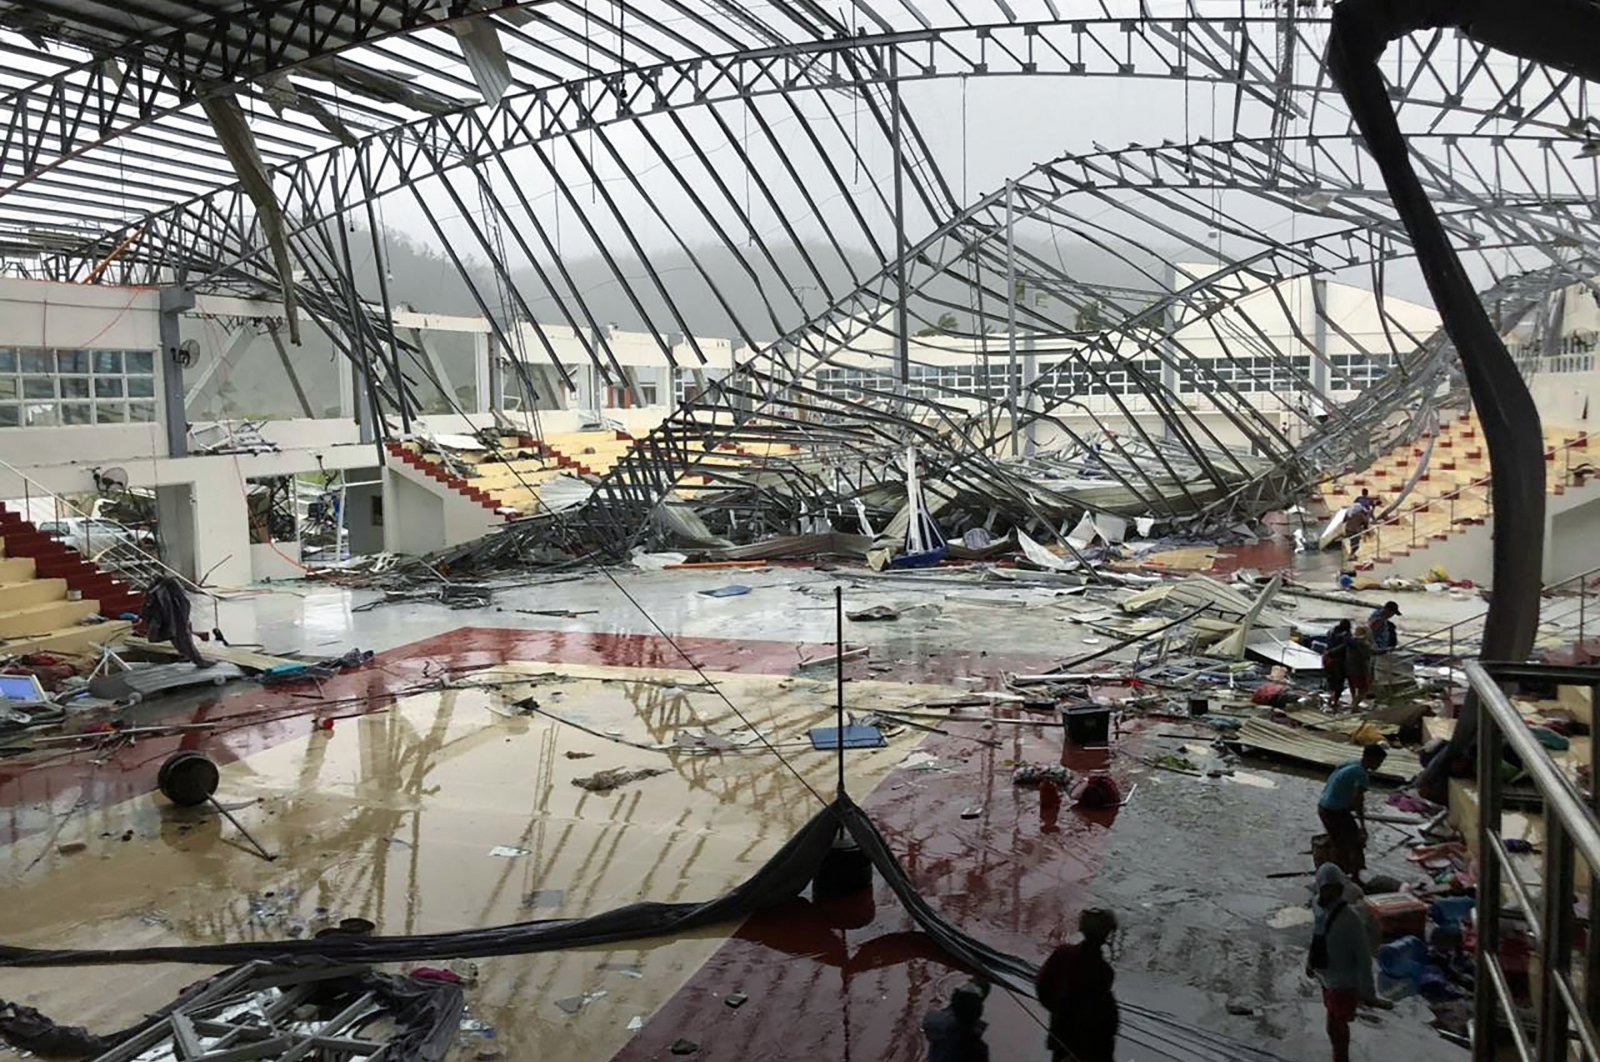 People stand inside a sport complex building whose roof collapsed after Super Typhoon Rai in Dapa town, Siargao Island, Philippines, Dec. 16, 2021. (AFP Photo)